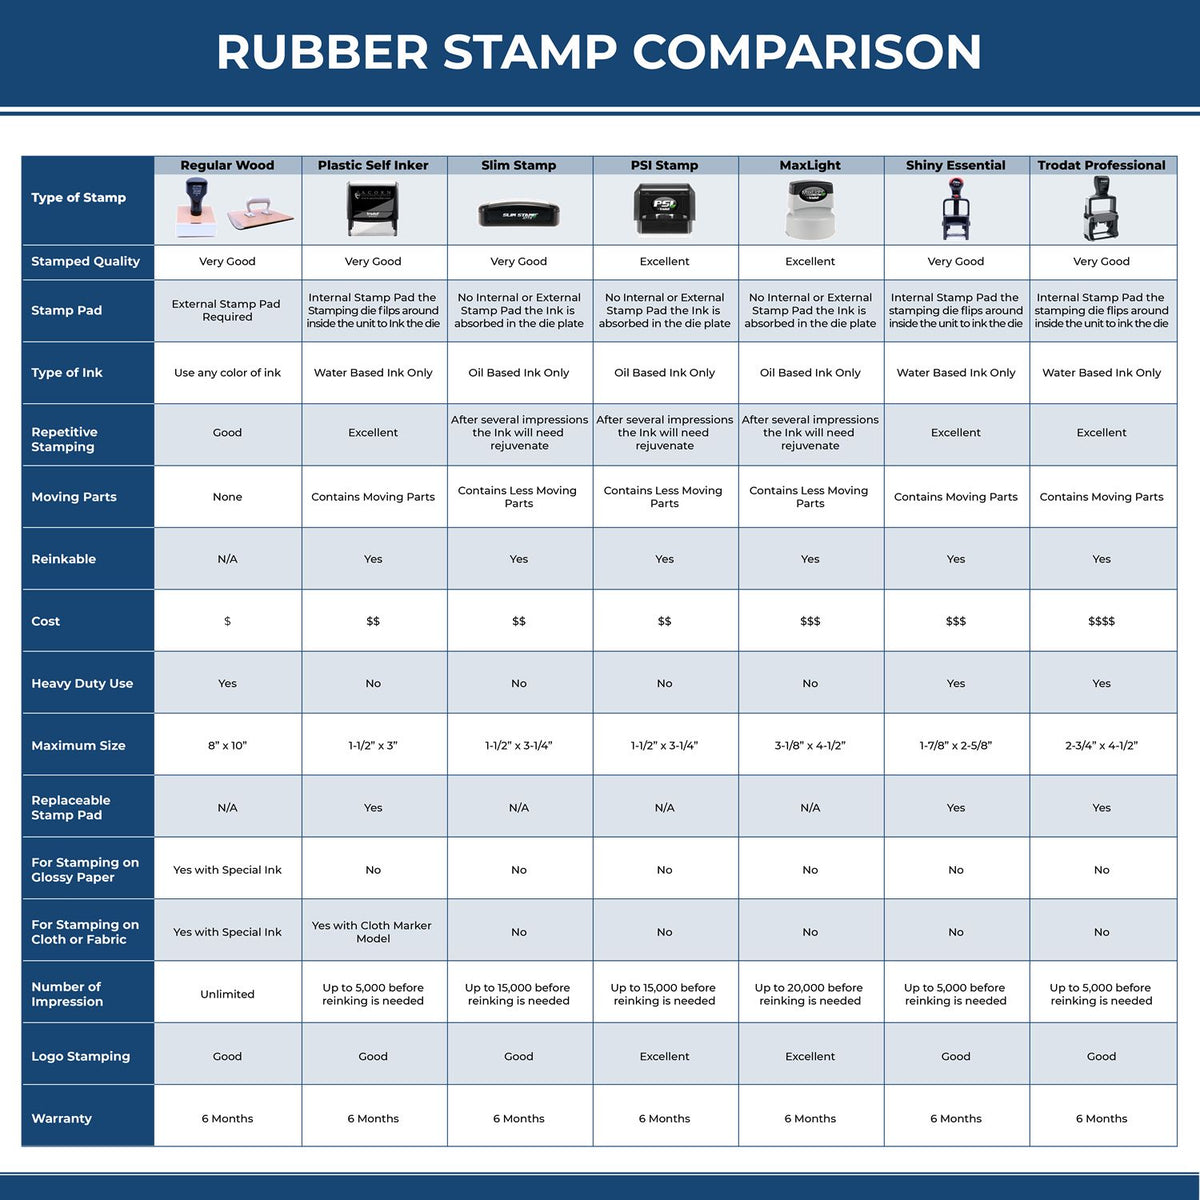 A comparison chart for the different types of mount models available for the PSI South Carolina Notary Stamp.